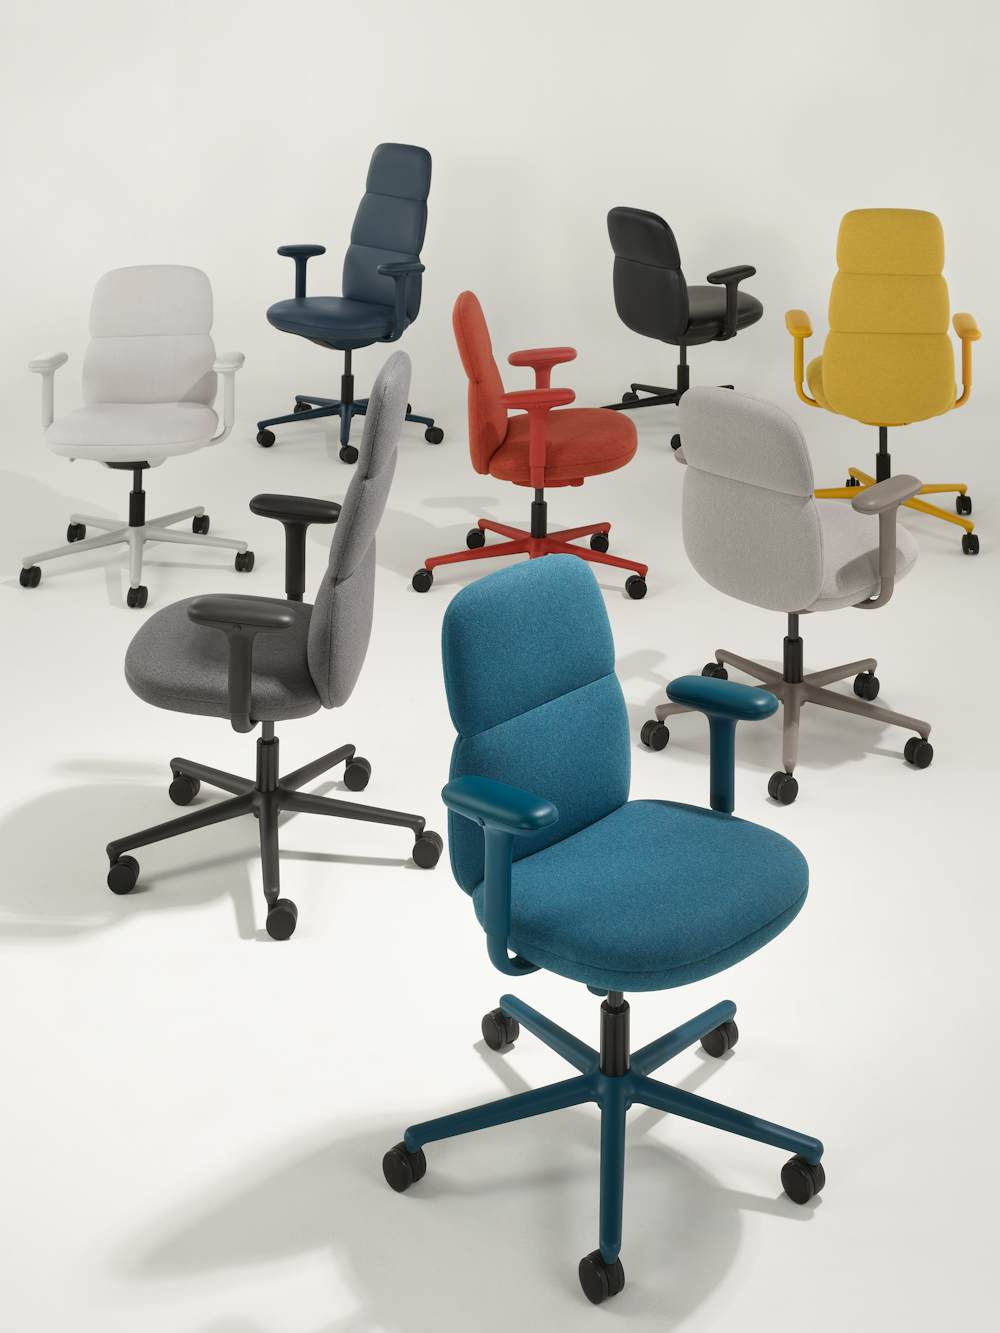 A group of eight Asari chairs by Herman Miller with height adjustable arms in all available color flood options. There are five high-back chairs and three mid-back chairs.